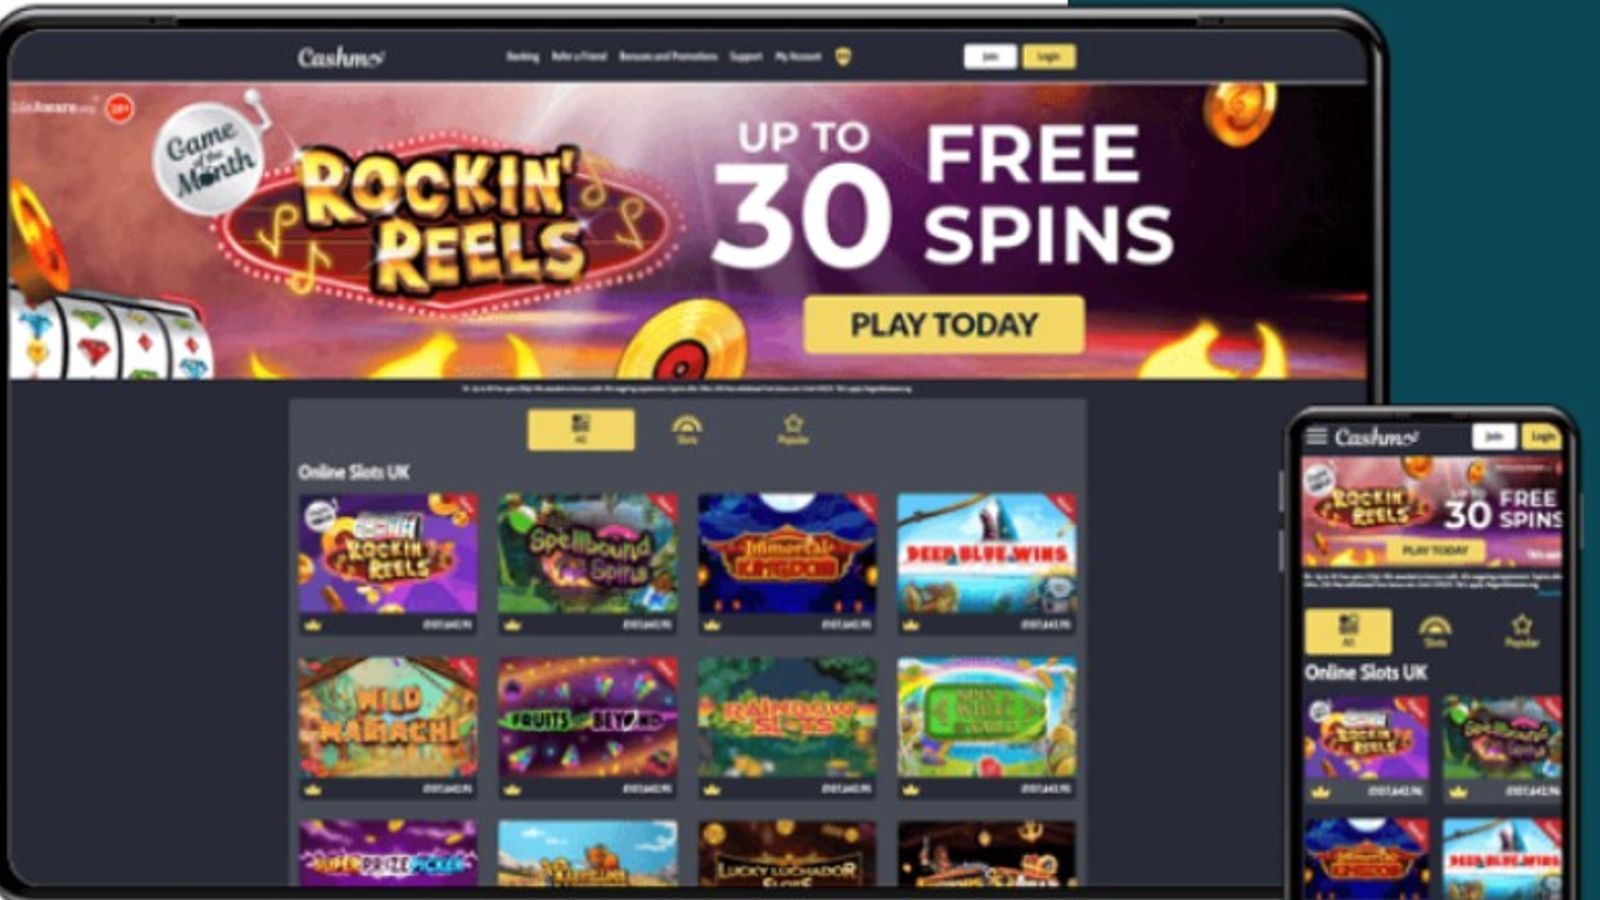 Gambling company In Touch Games fined £6.1m for 'social responsibility and money laundering failings'